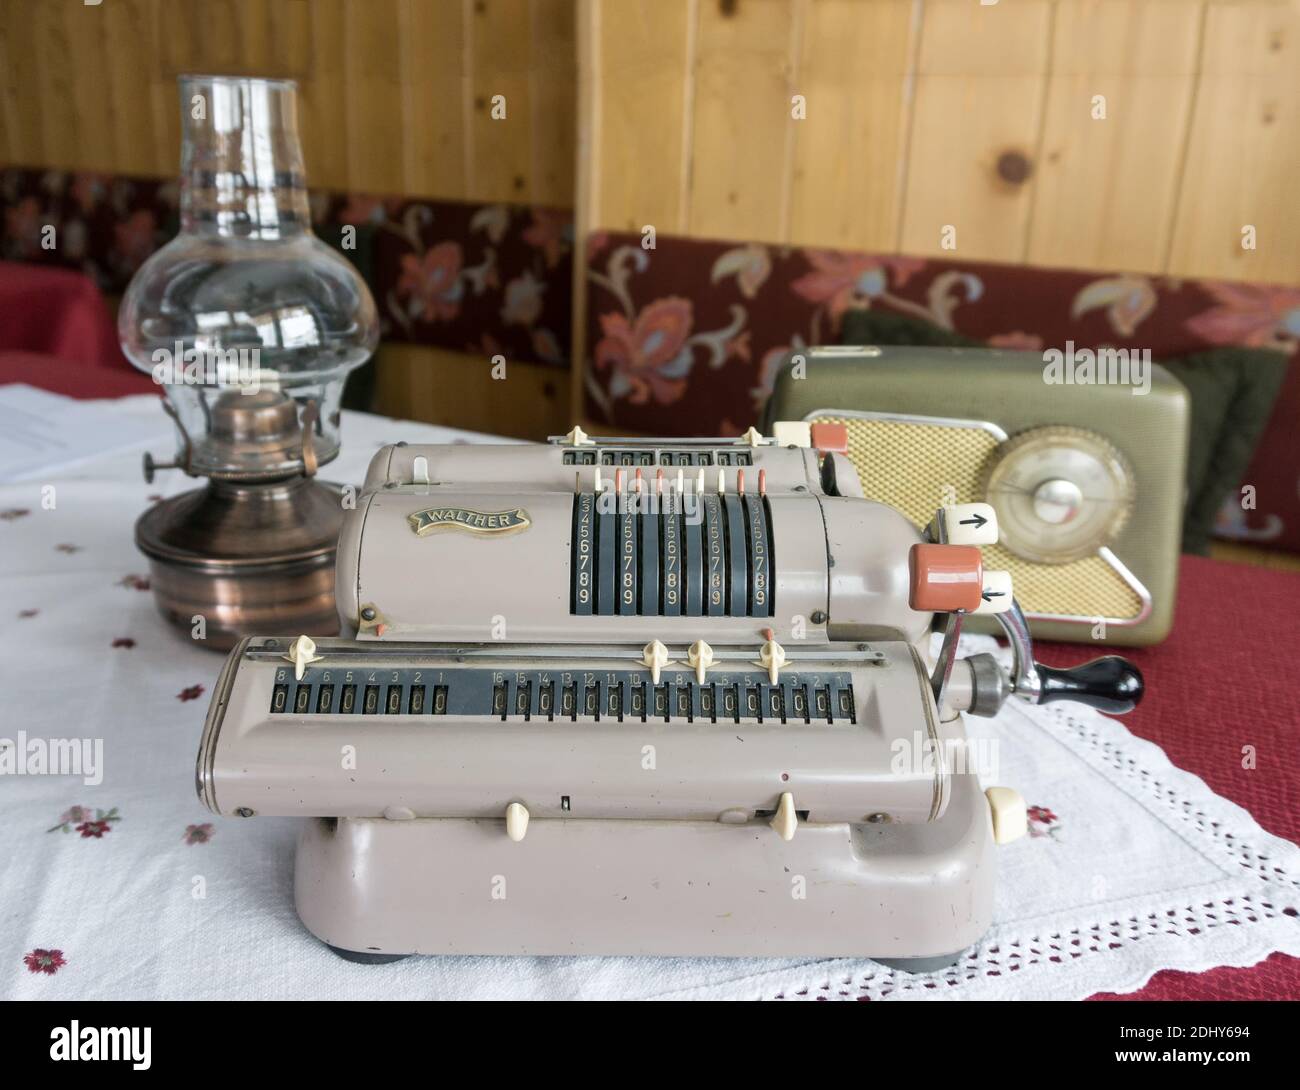 EHRWALD, AUSTRIA - JANUARY 7, 2019: Vintage technical equipment. Walther's mechanical calculating machine with vintage radio receiver and  kerosene la Stock Photo